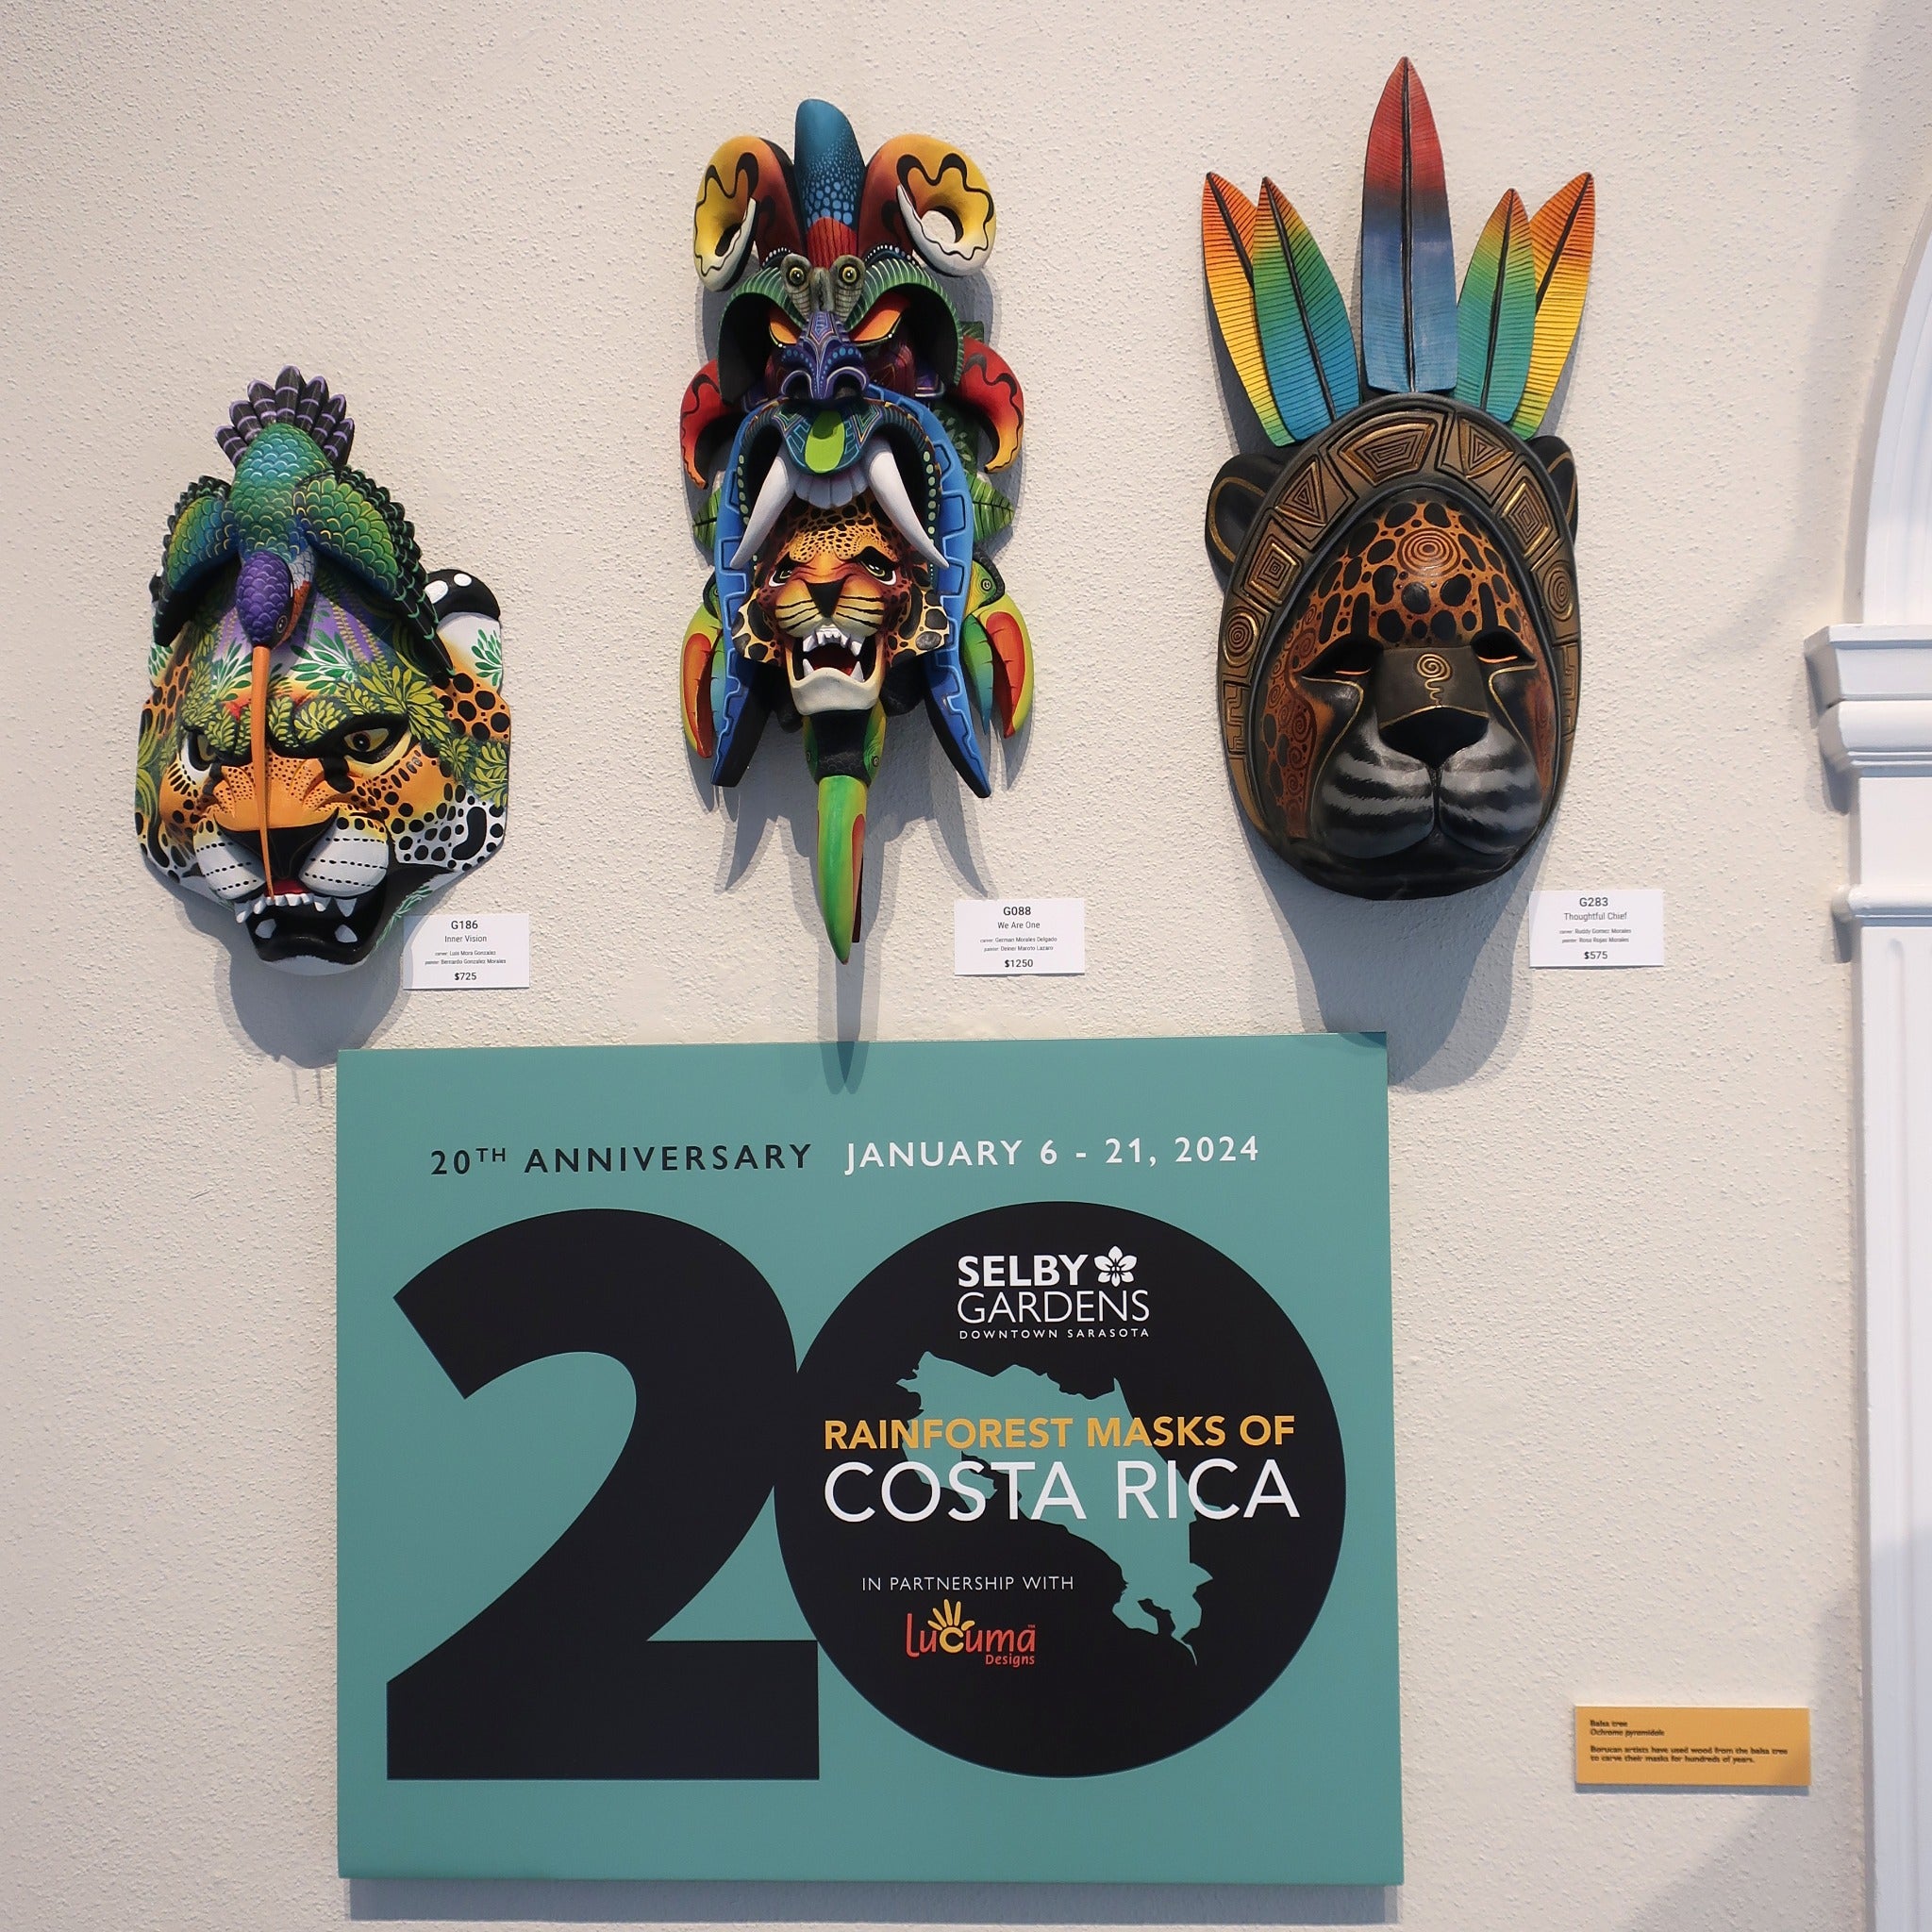 That's a wrap!  The 20th Annual Rainforest Masks exhibit showcasing Borucan art closed with happy visitors and great sales.